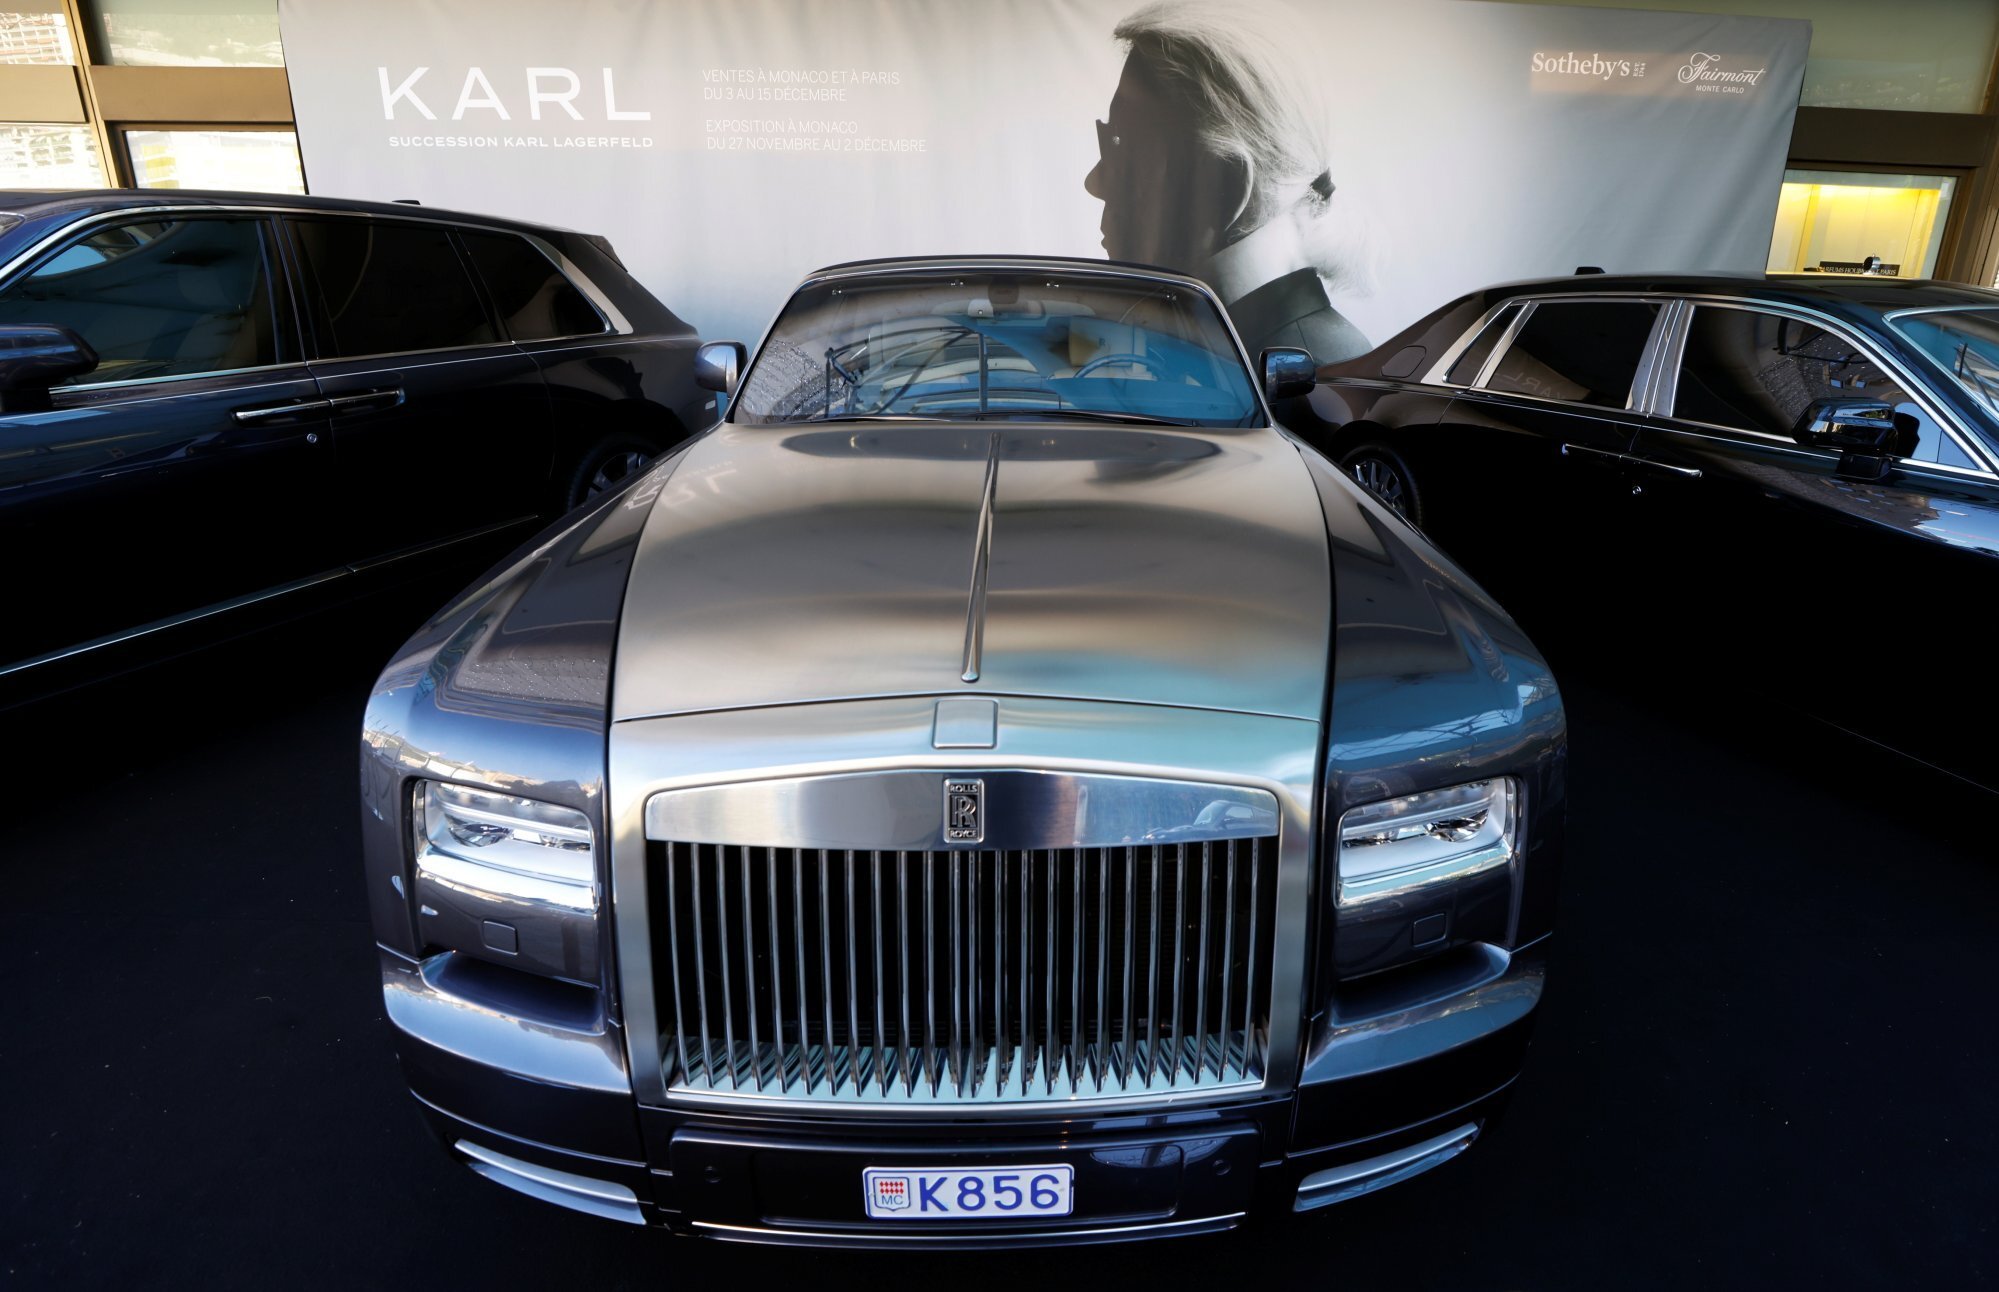 Project – Karl Lagerfeld in Roermond & Provence